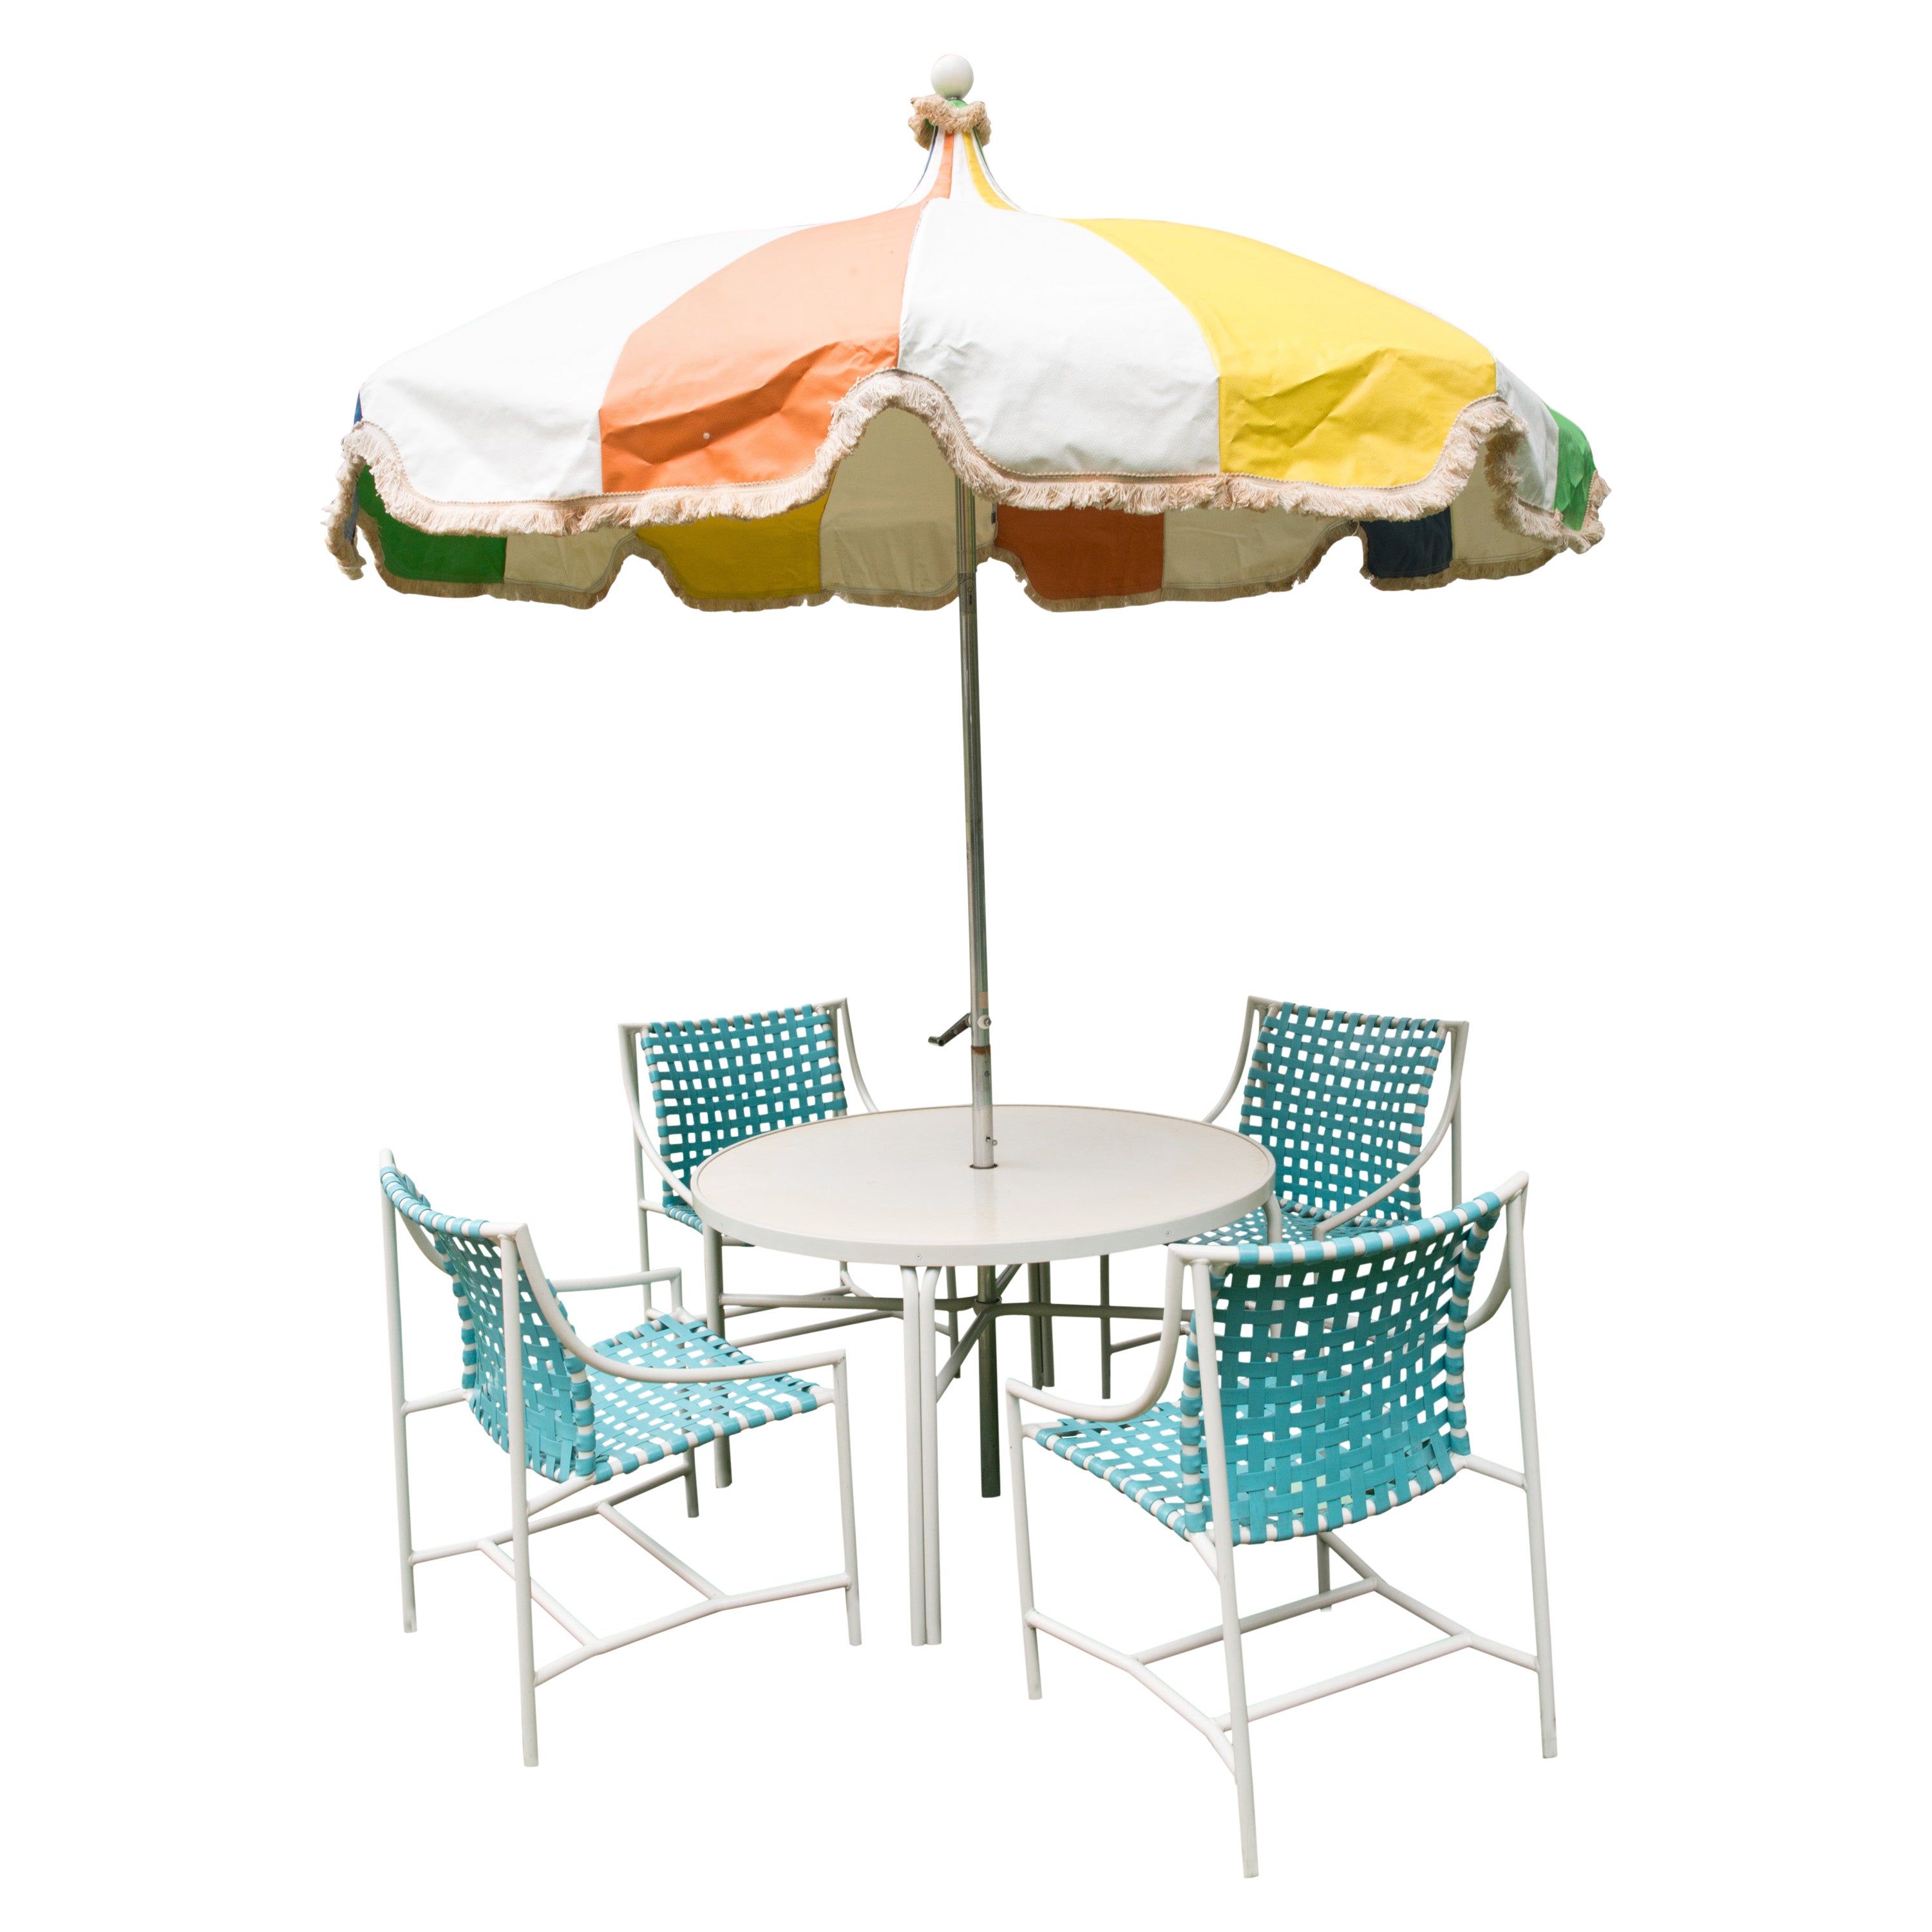 1960s Tropitone Umbrella Table and Chairs